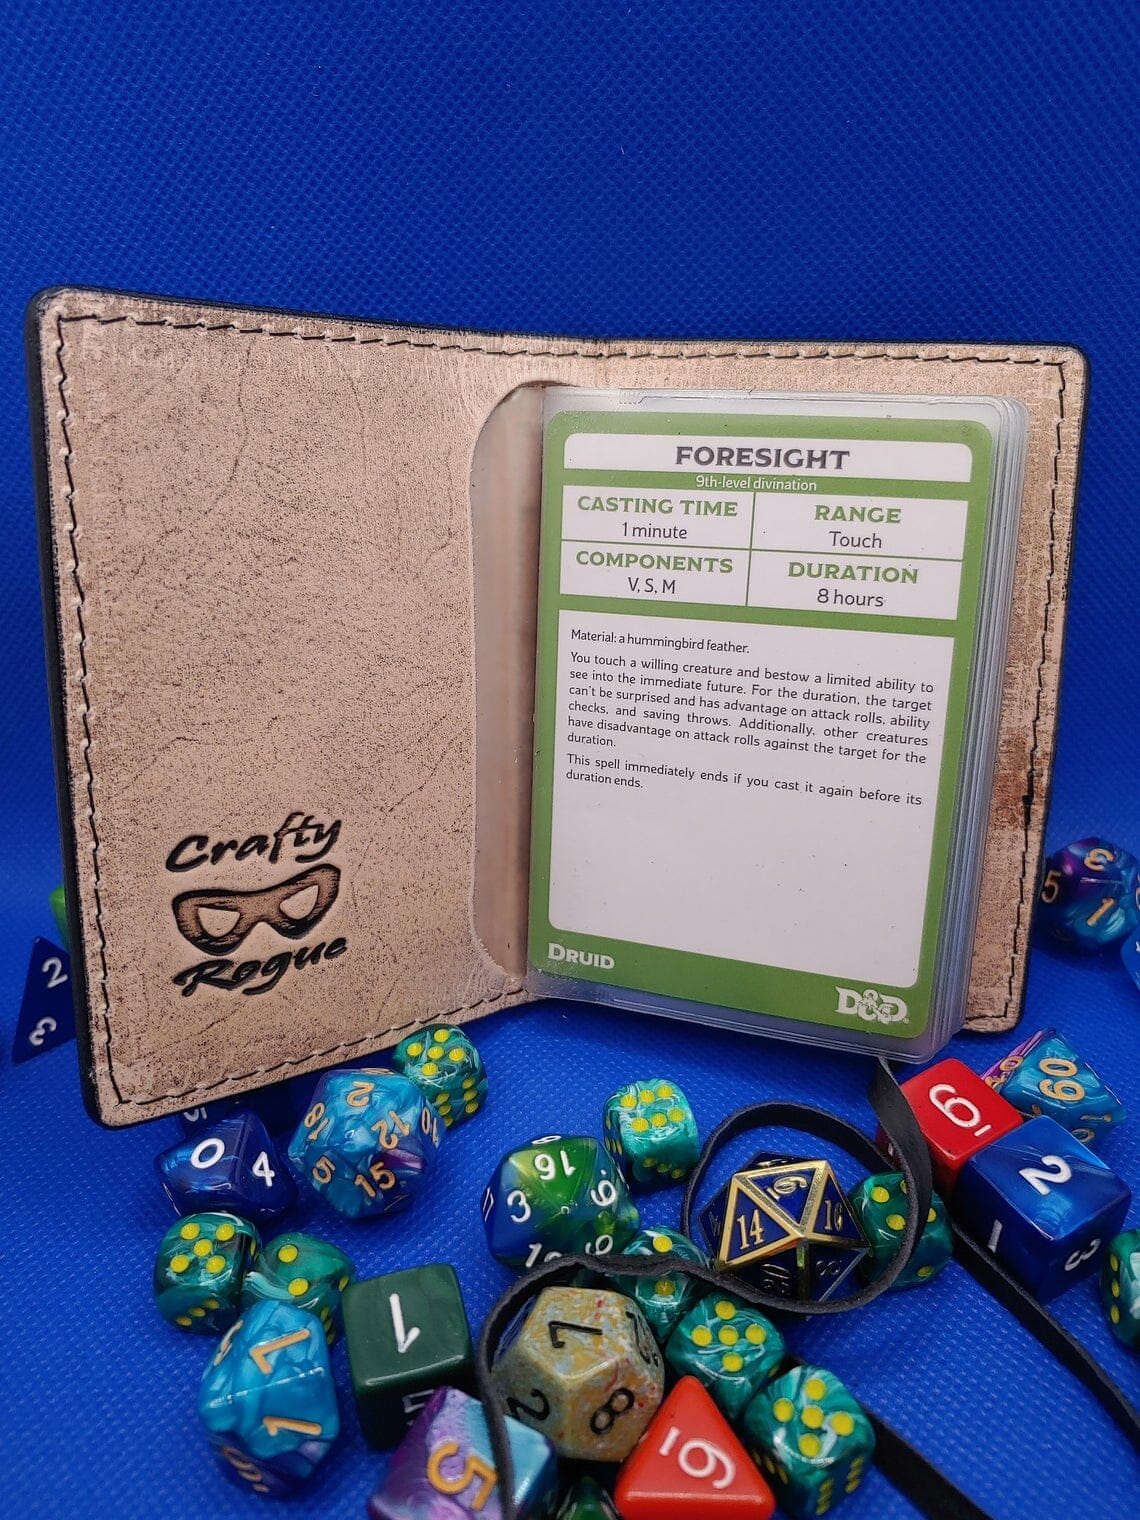 The Crafty Rogue's Spell card book